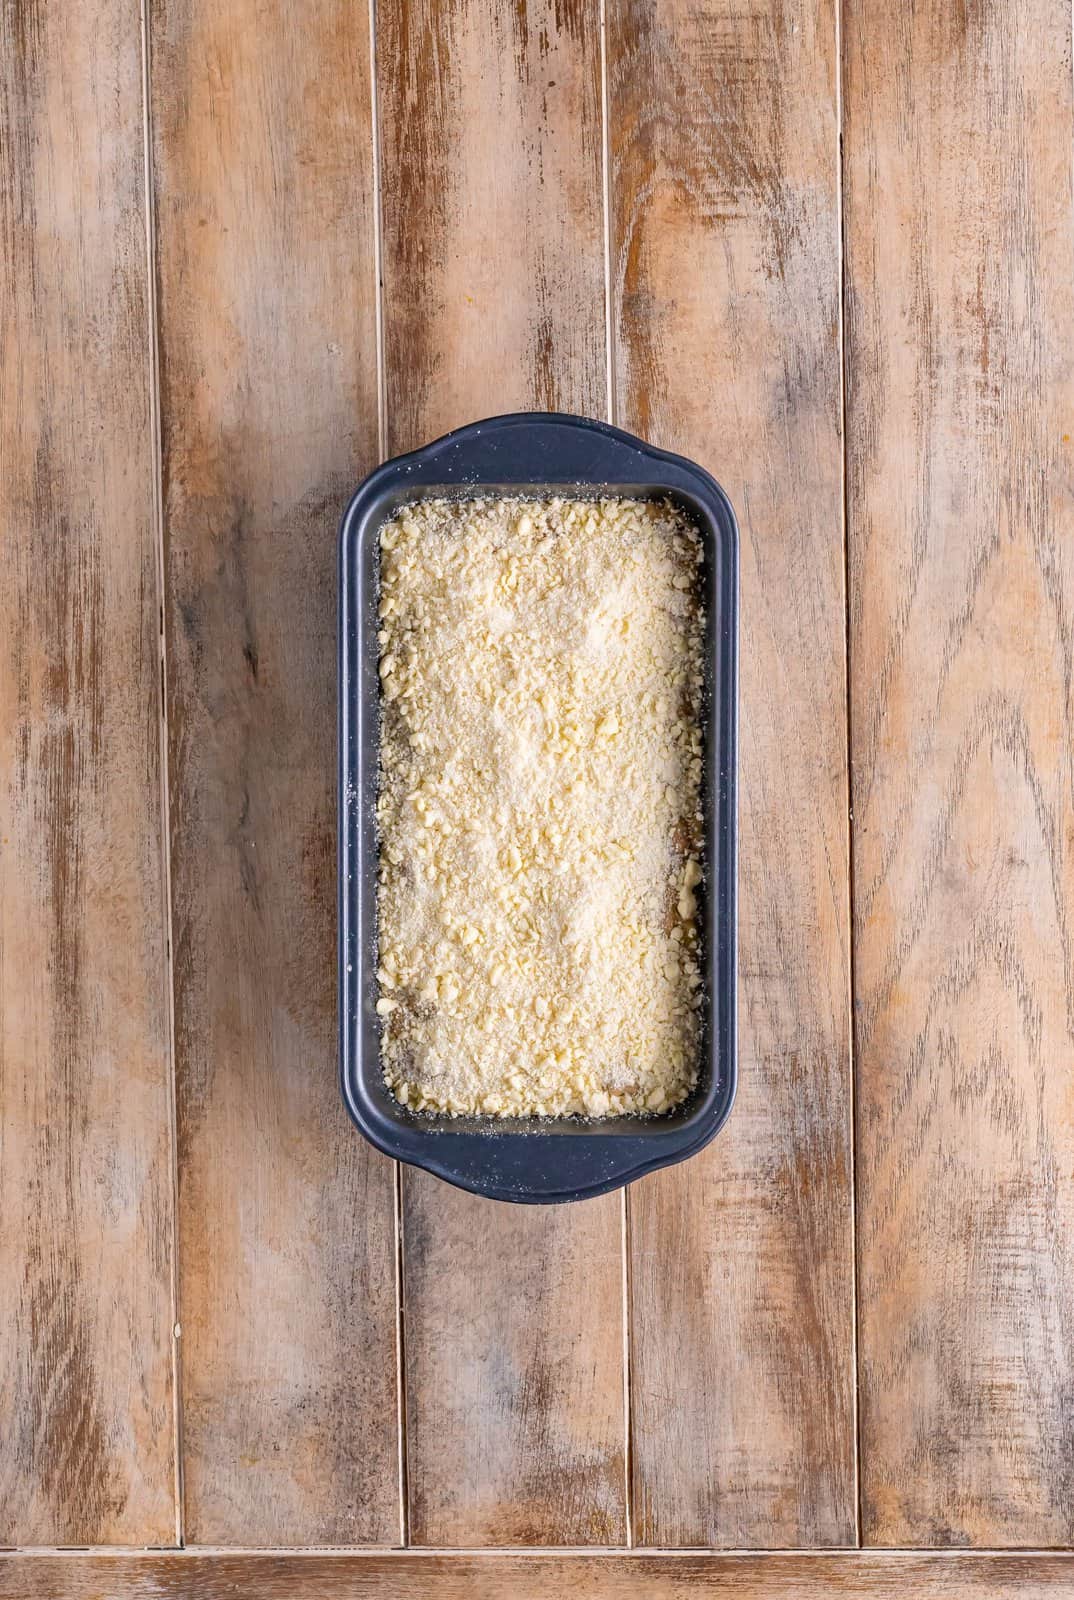 crumble topping shown sprinkled evenly on top of banana bread batter in a loaf pan.